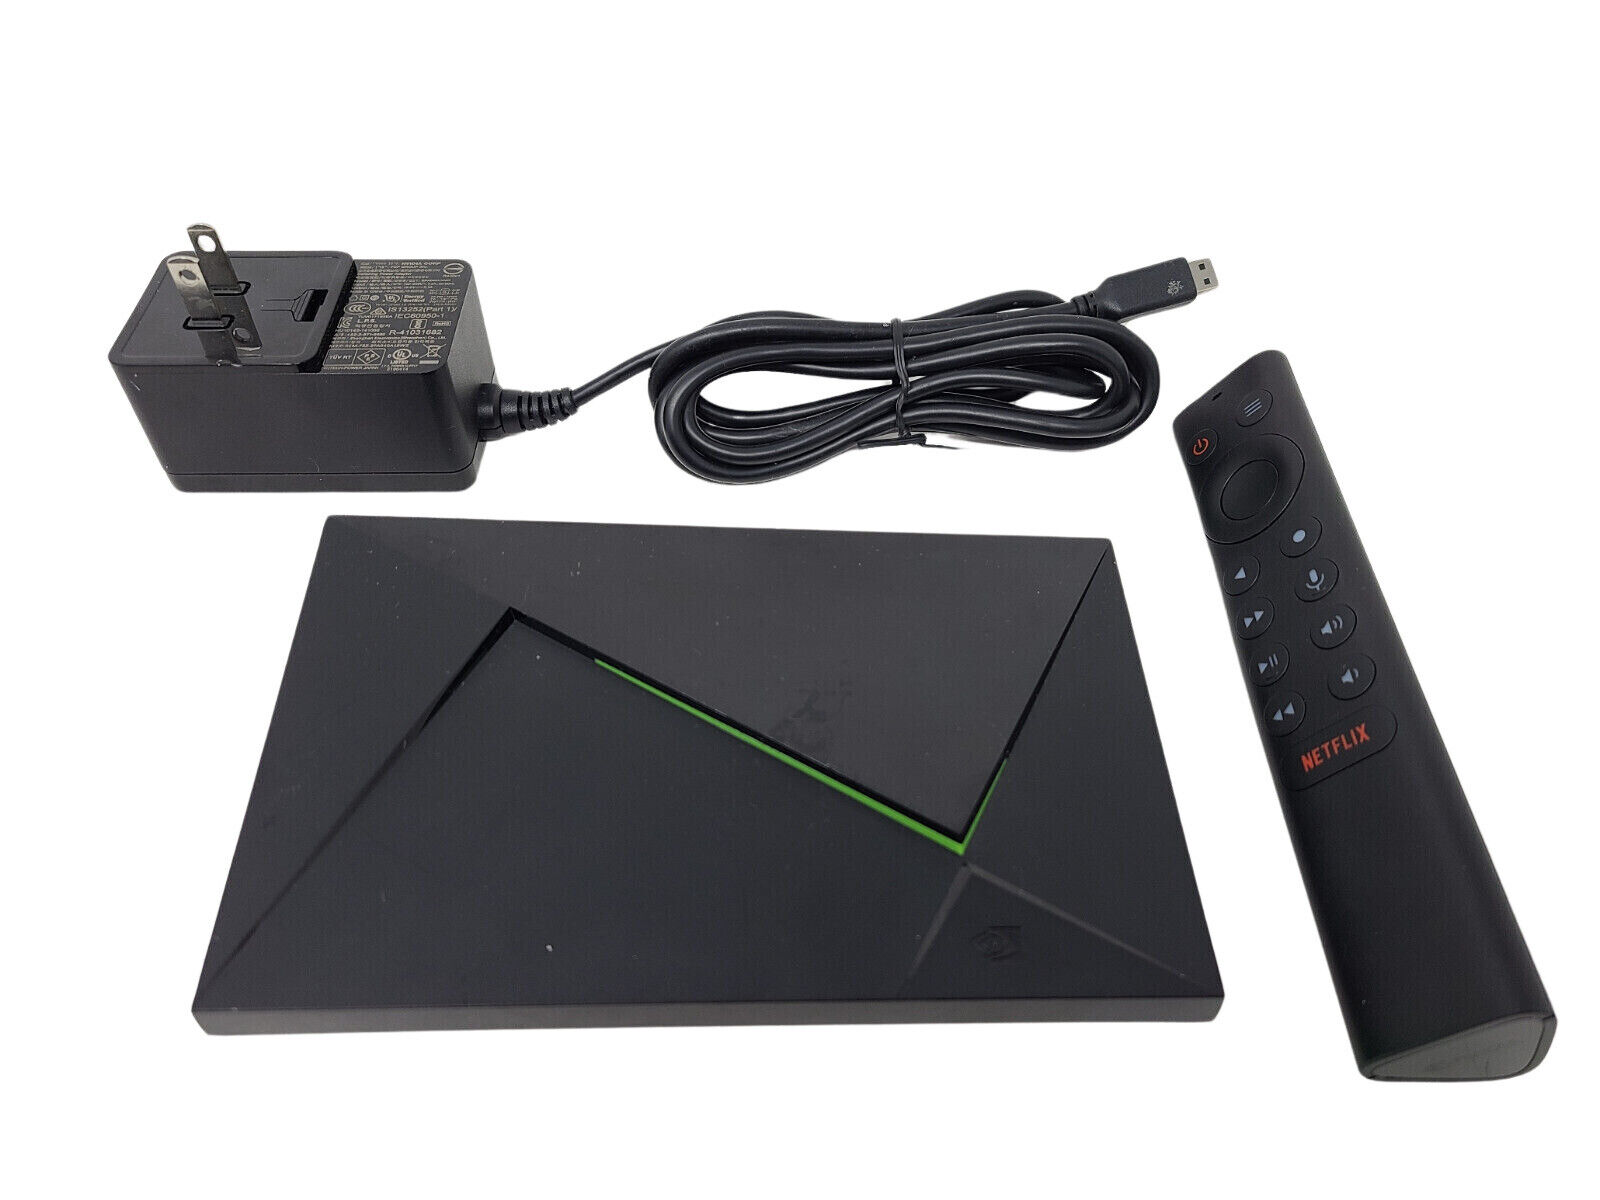 NVIDIA SHIELD Android TV Pro 4K HDR Streaming Media Player for sale online